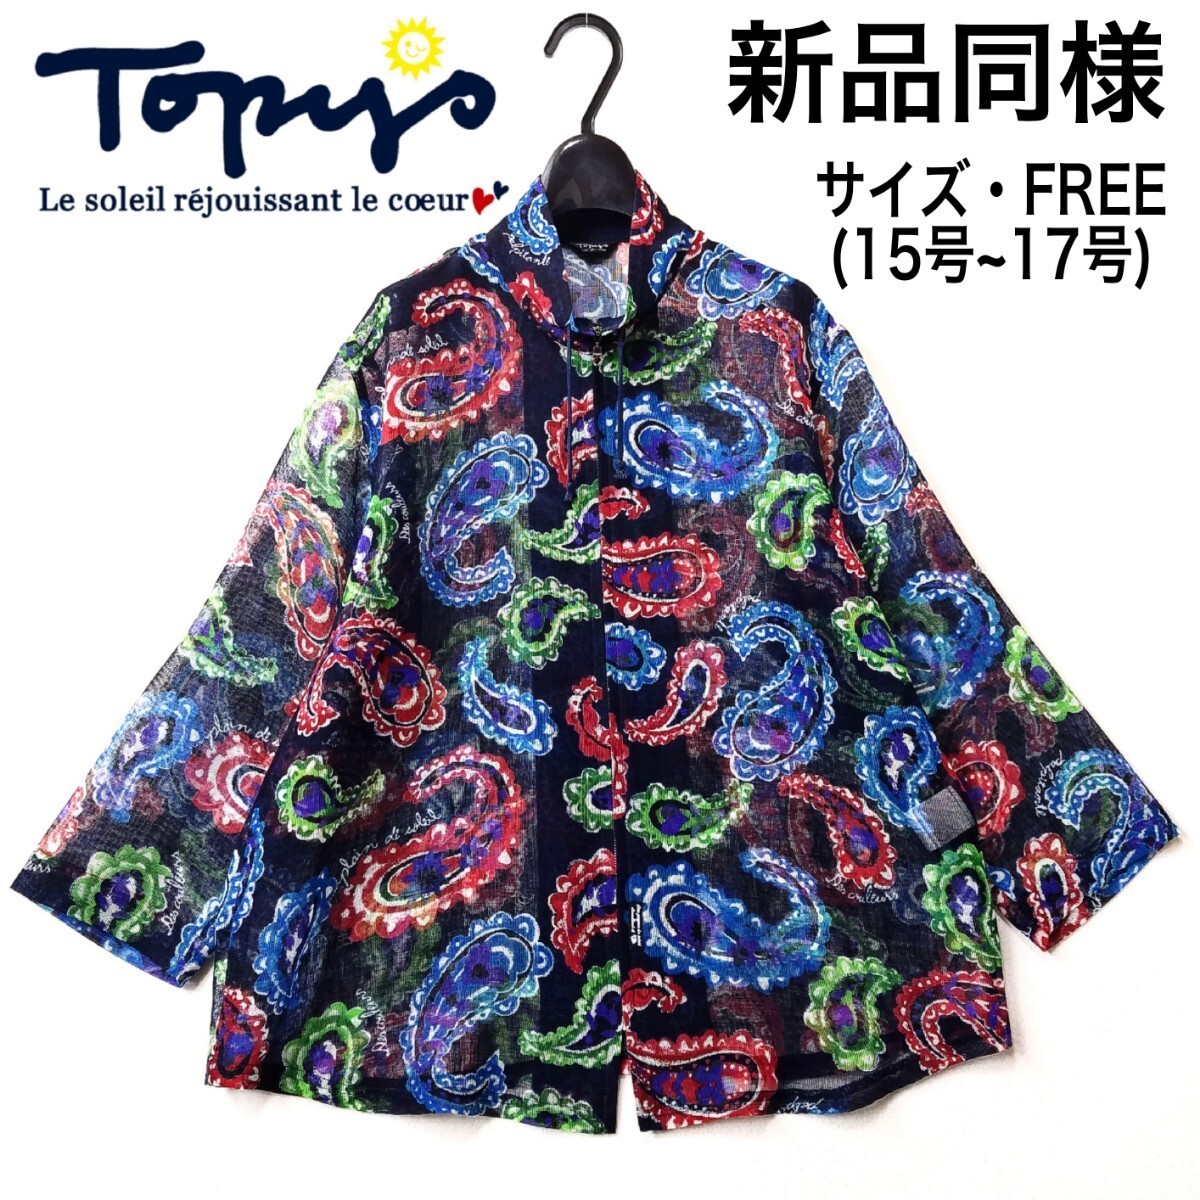  spring summer [ as good as new ]topi.-z/ large size 15 number ~17 number /7 minute sleeve see-through ZIP jacket / navy blue [ have been cleaned ]Topys/topi-z/ coat 